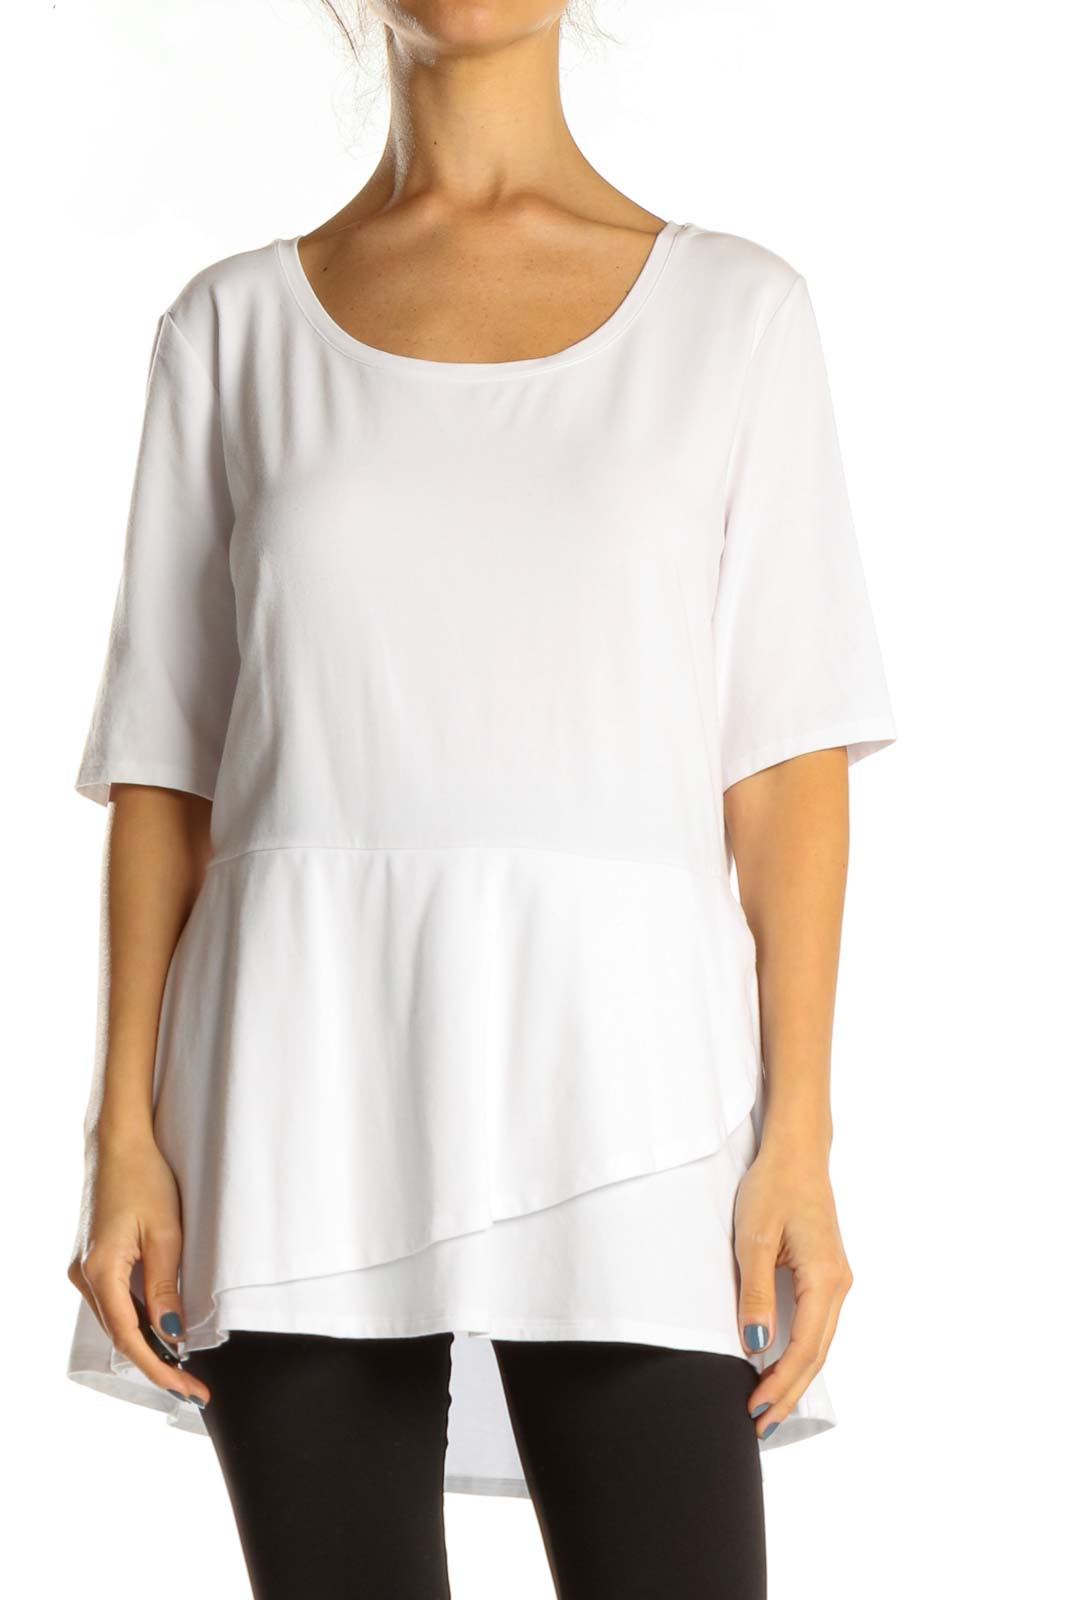 White Casual T-shirt Front